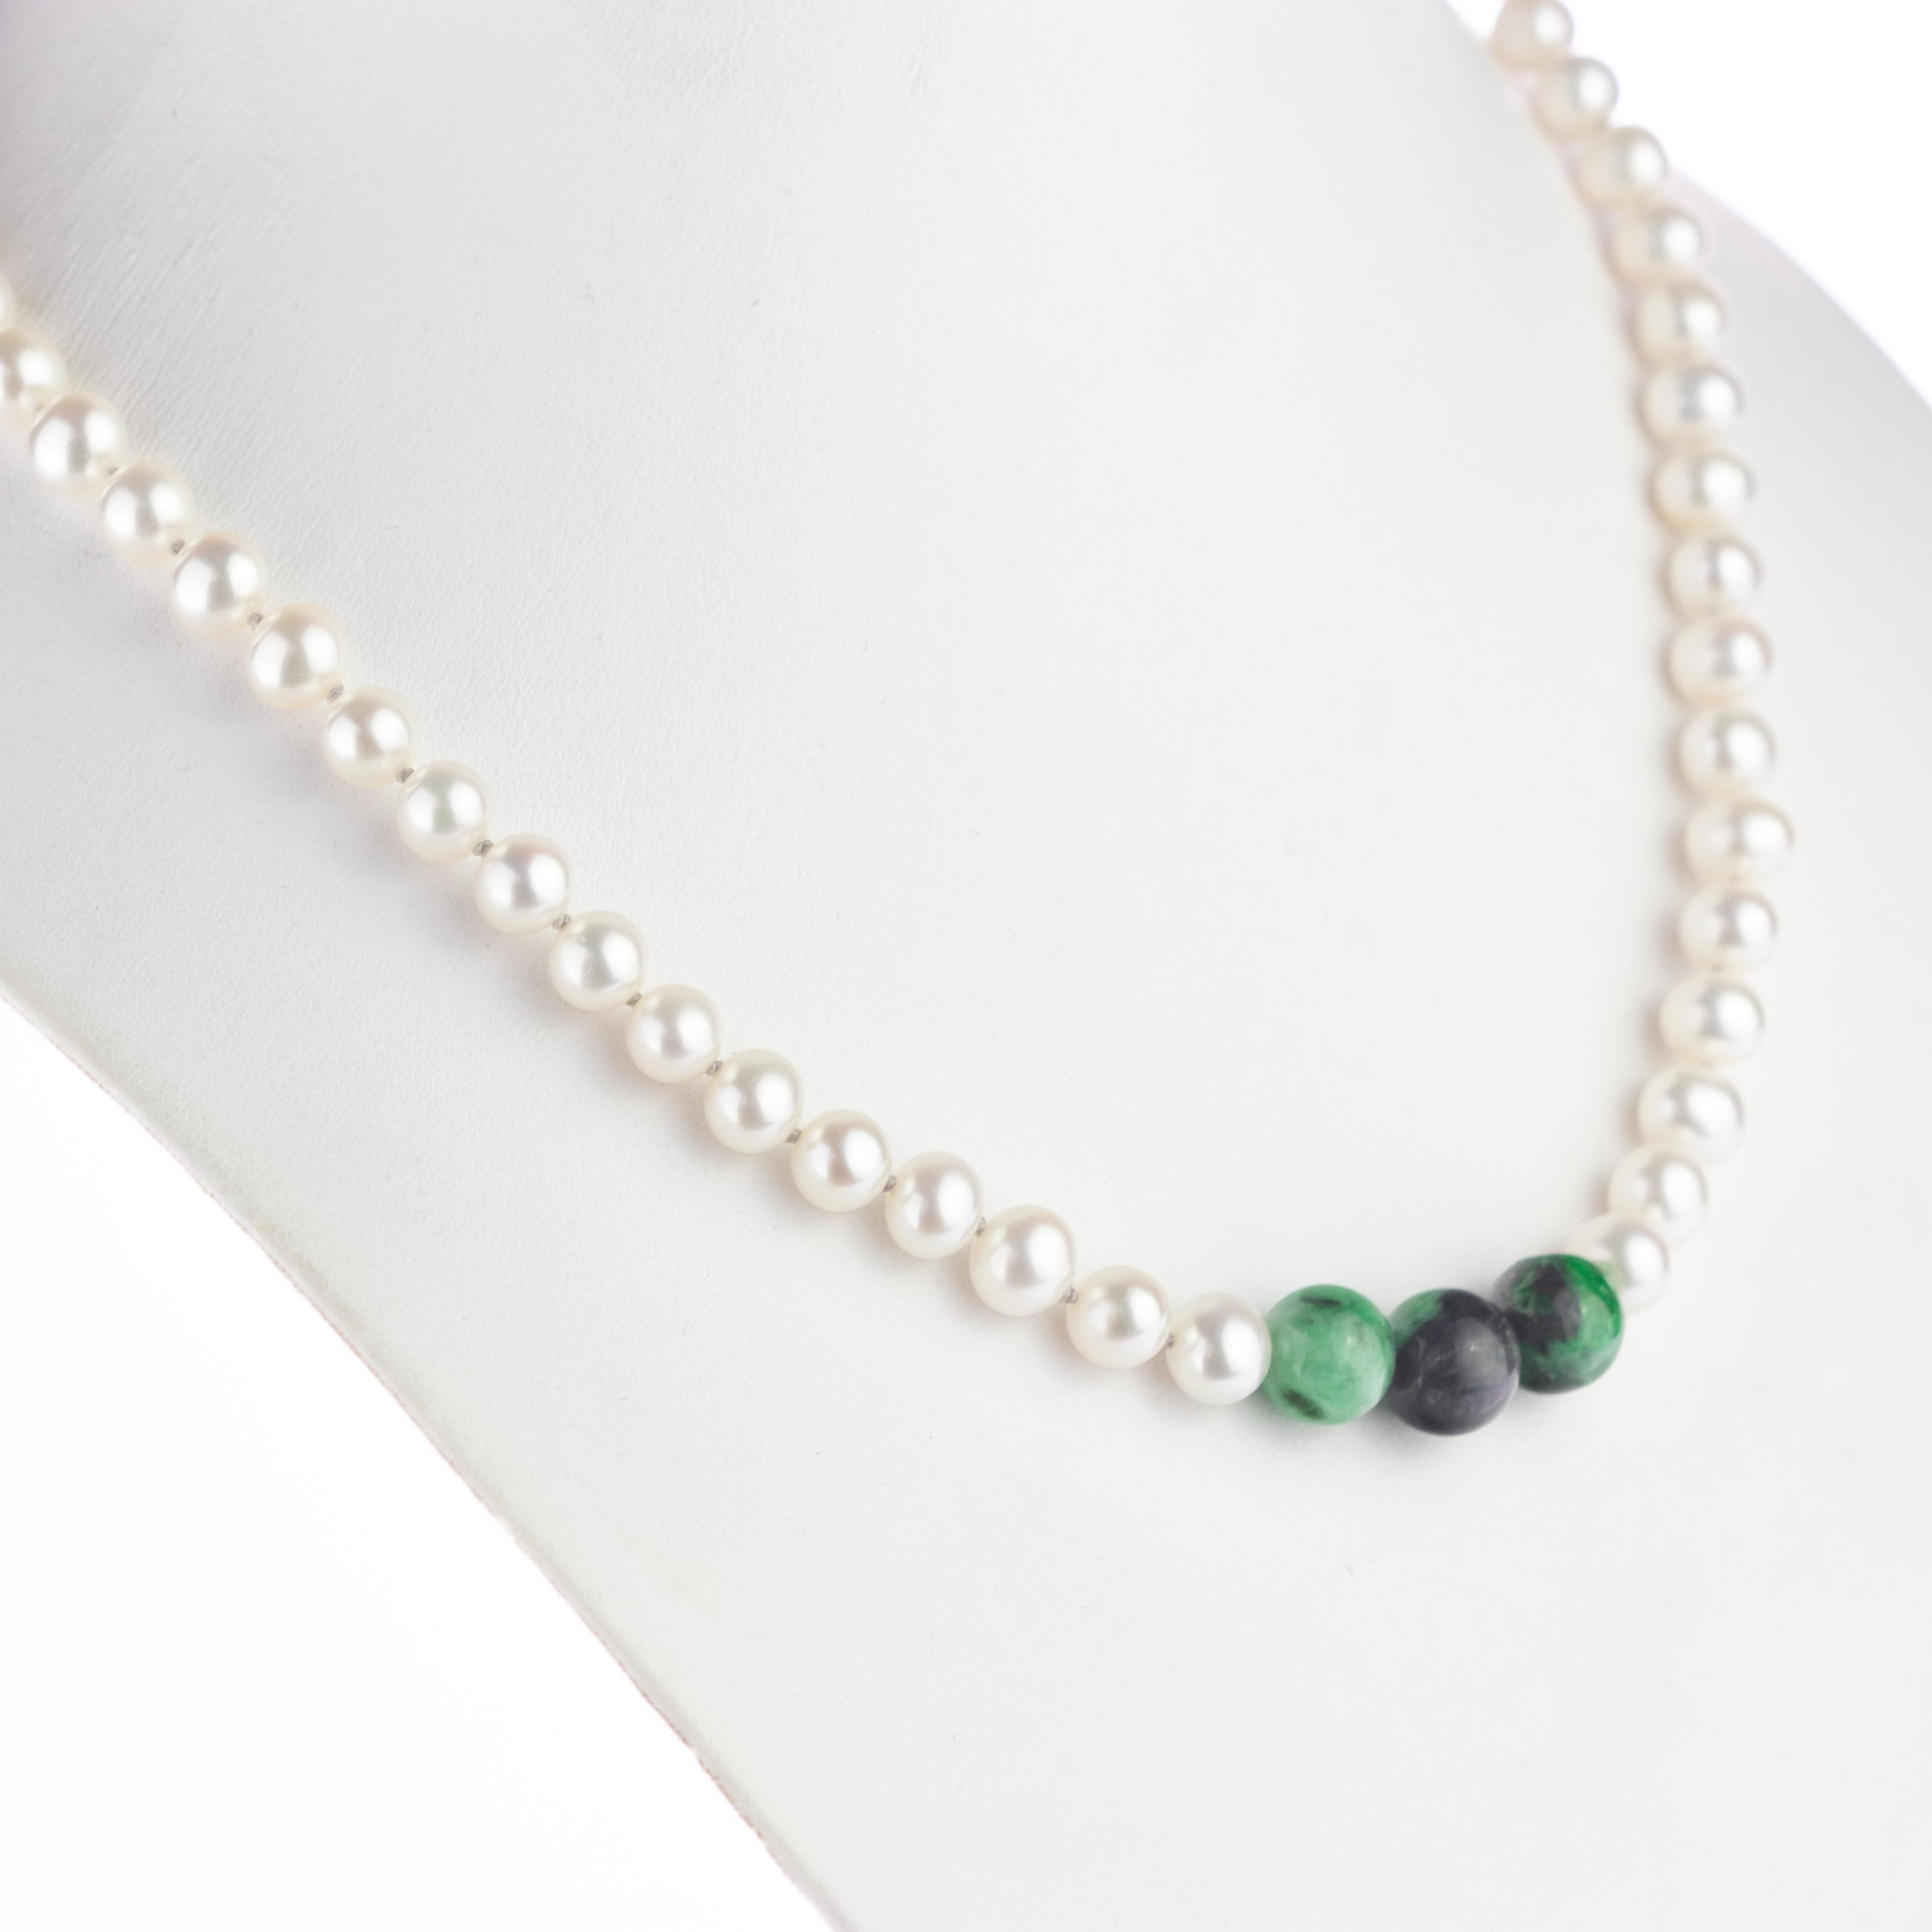 A timeless design meets charming jade. Top quality materials for a Made in Italy iconic necklace. First class freshwater pearls and jade with an elegant closure in 14k yellow gold. An iconic collier for an elegant outfit.

Pearls are thought to